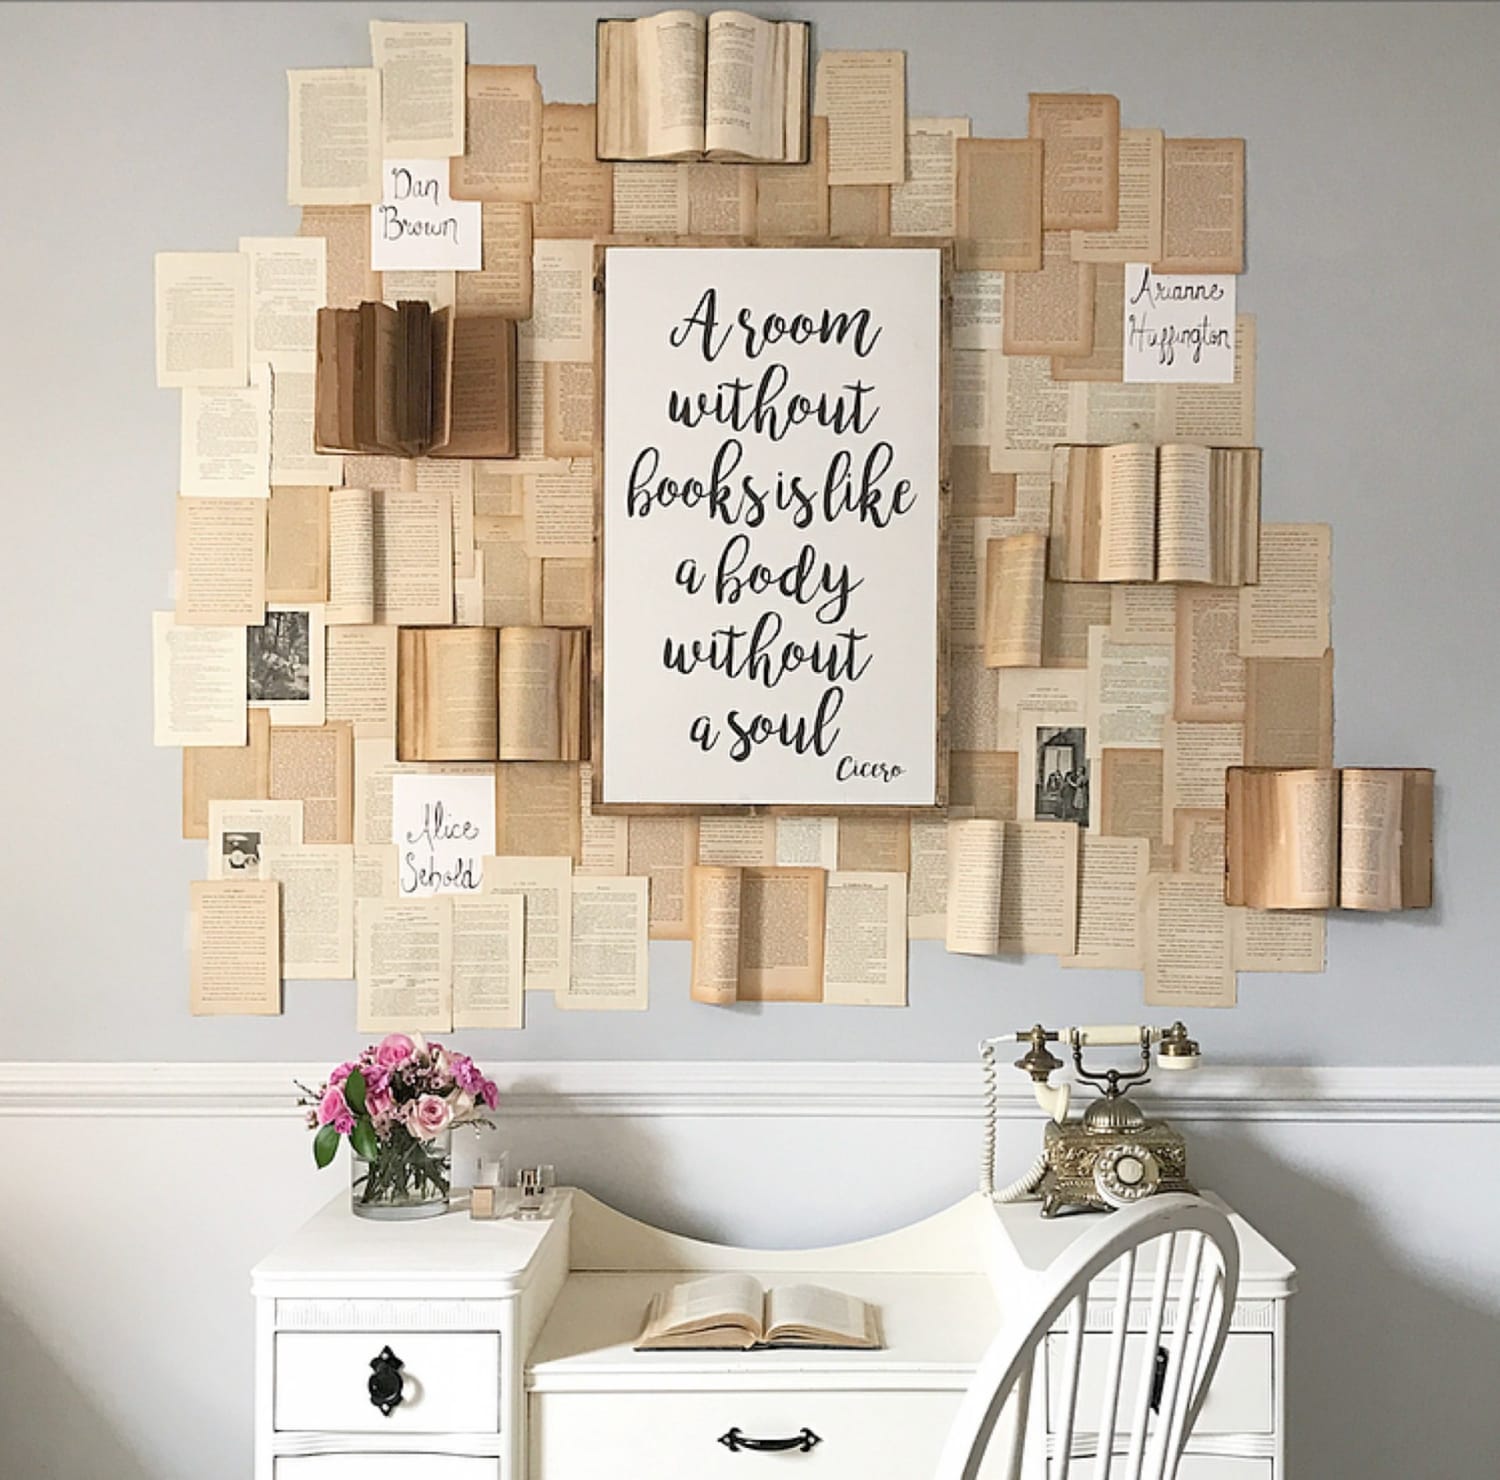 People Are Using Old Books To Create Wall Art What Do You Think Of The Trend